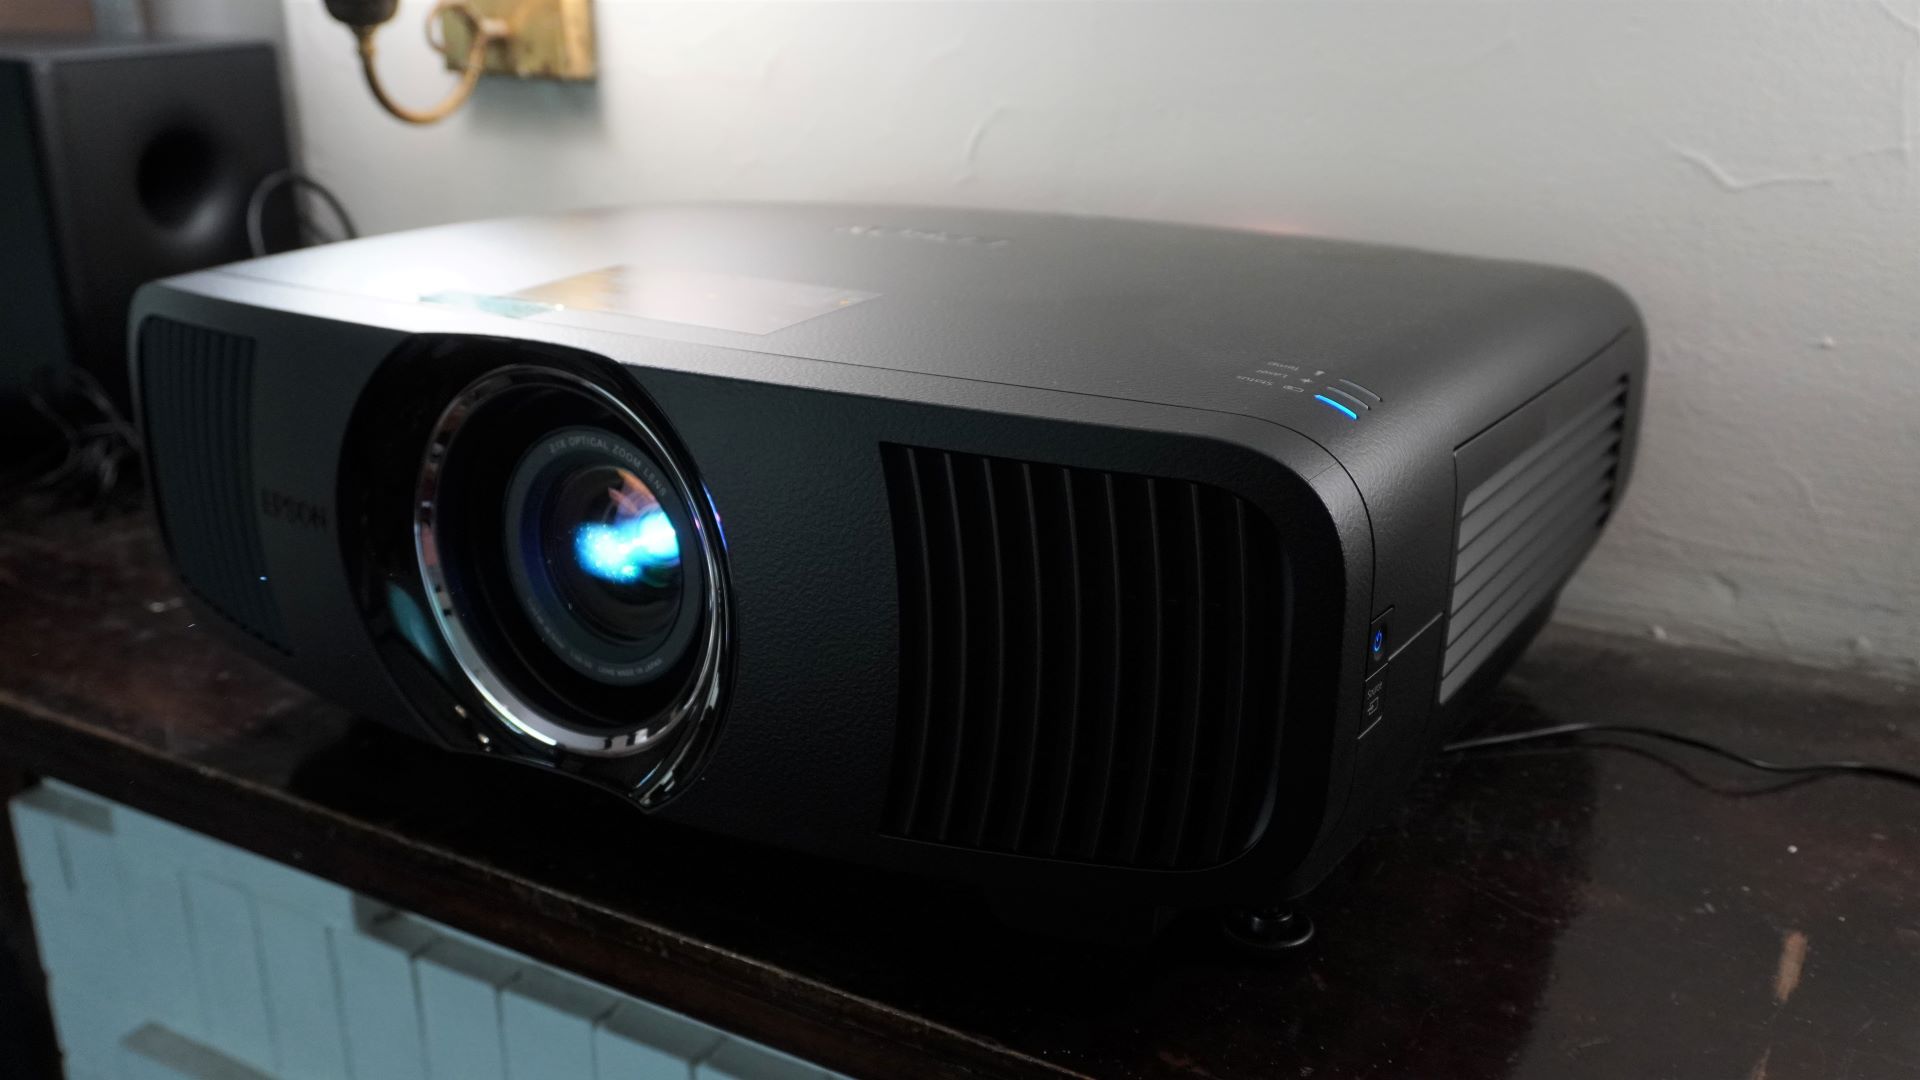 Epson LS12000 4K Home Theater Laser Projector with 2700 Lumens - Black -  Epson Epson-LS12000